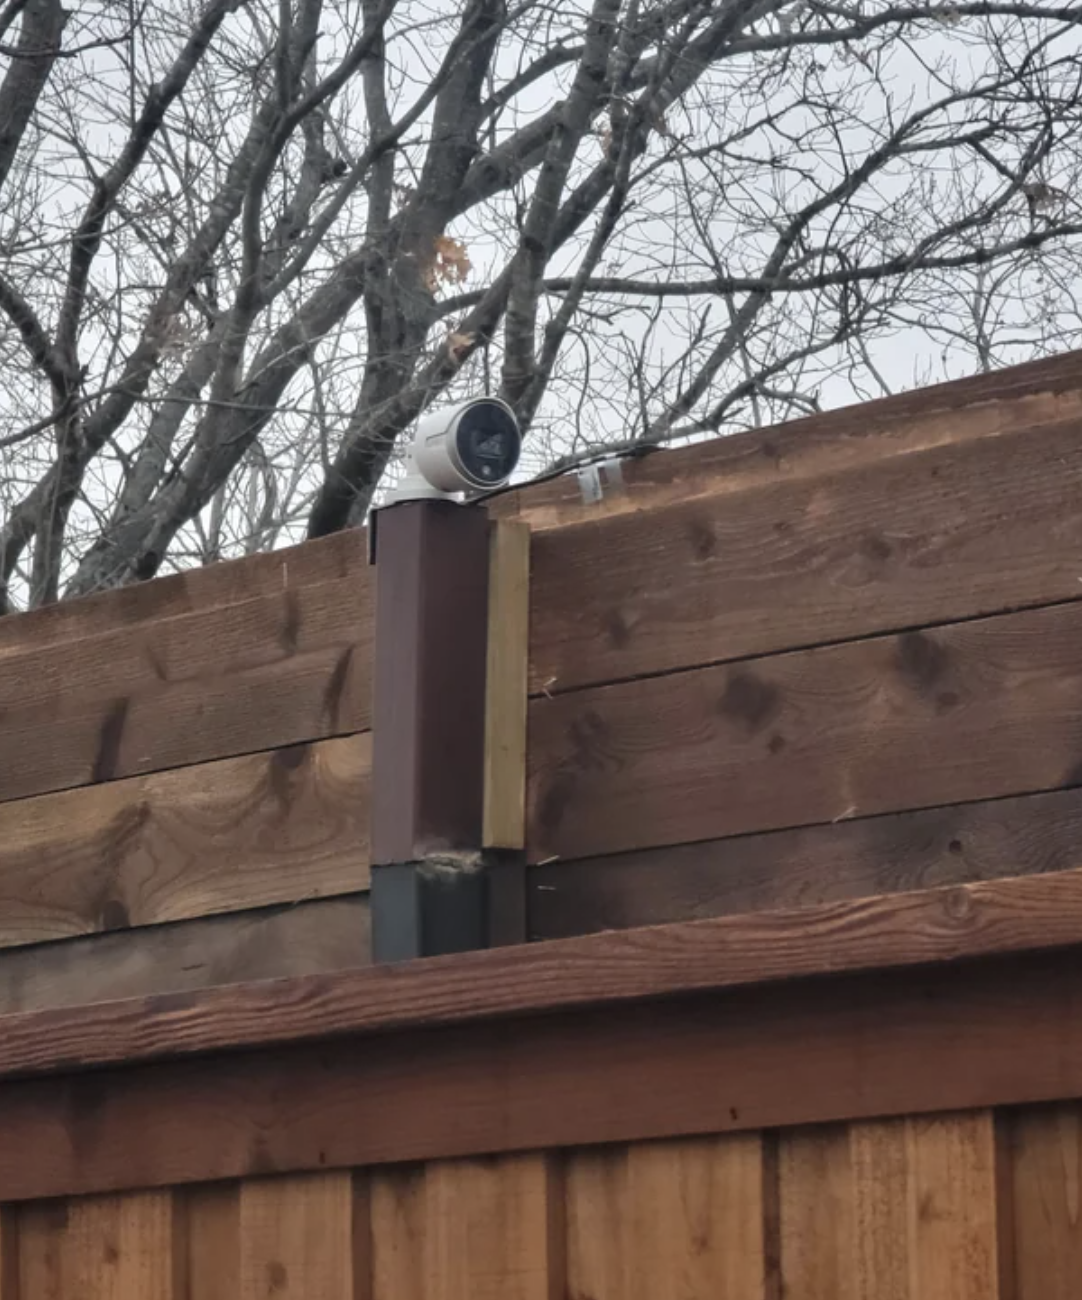 camera put on top of their fence